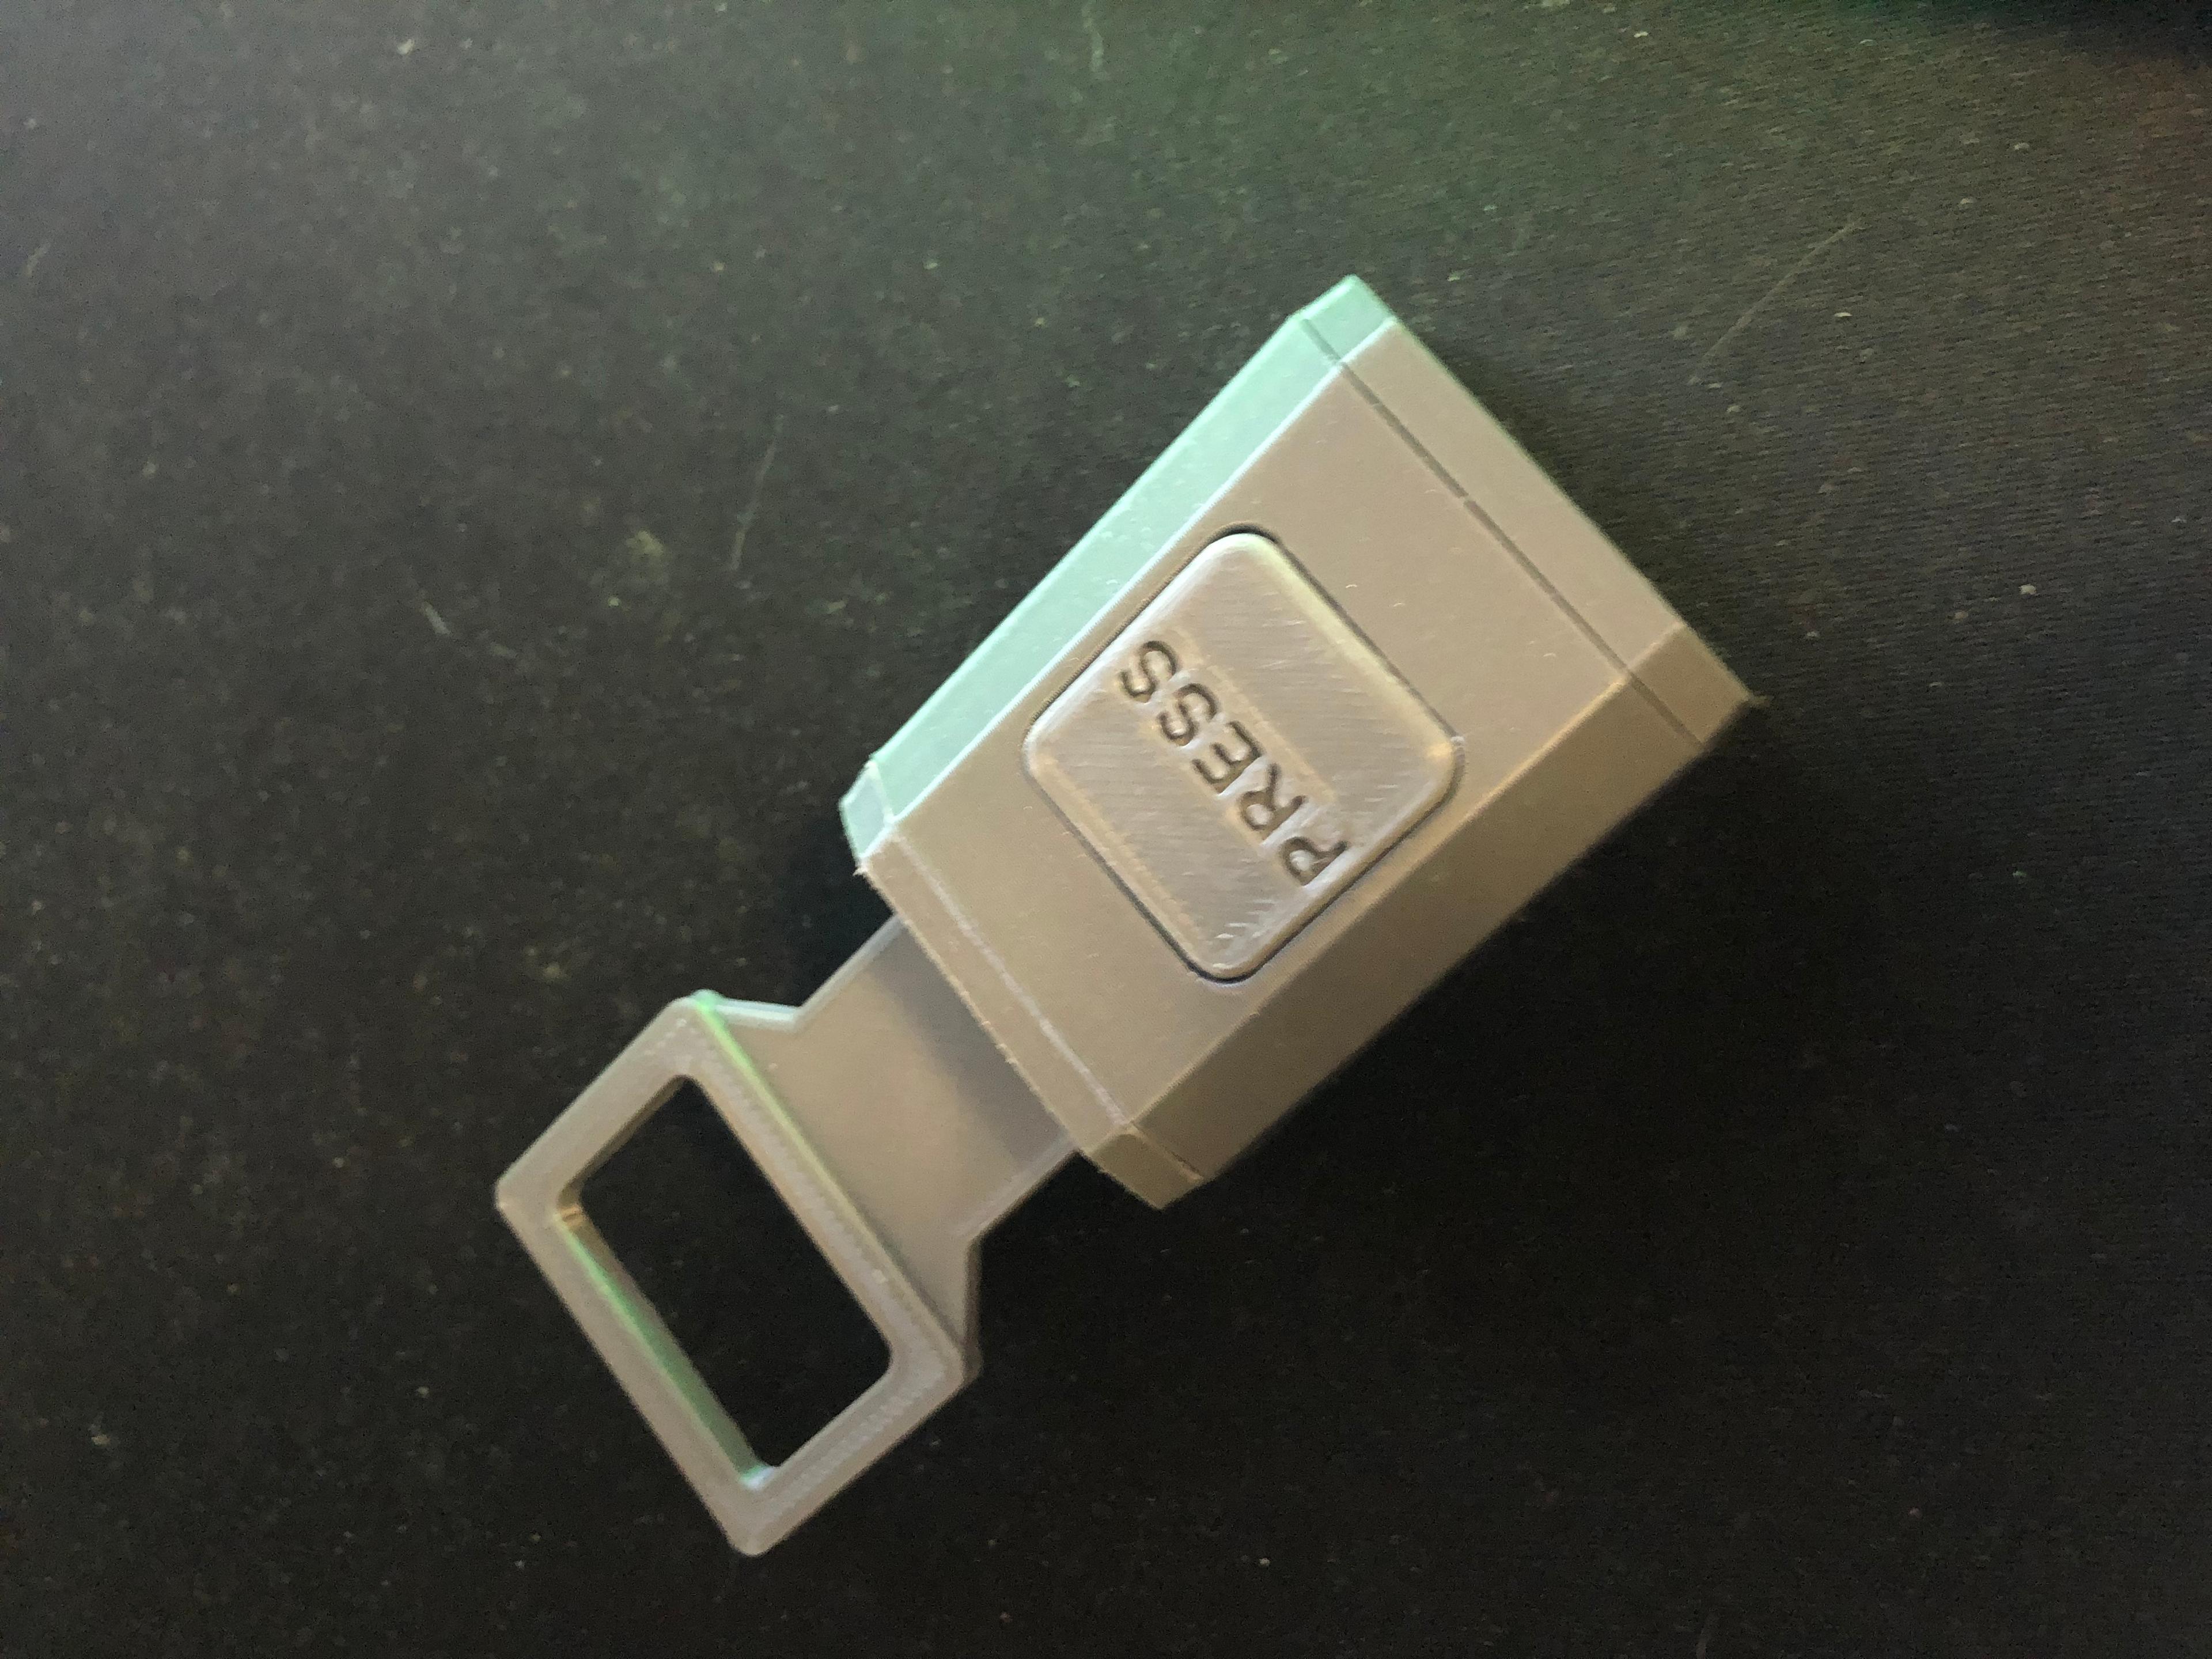 Wall Mount Key Hanger - I have been sent by a cyborg named Zack - 3d model